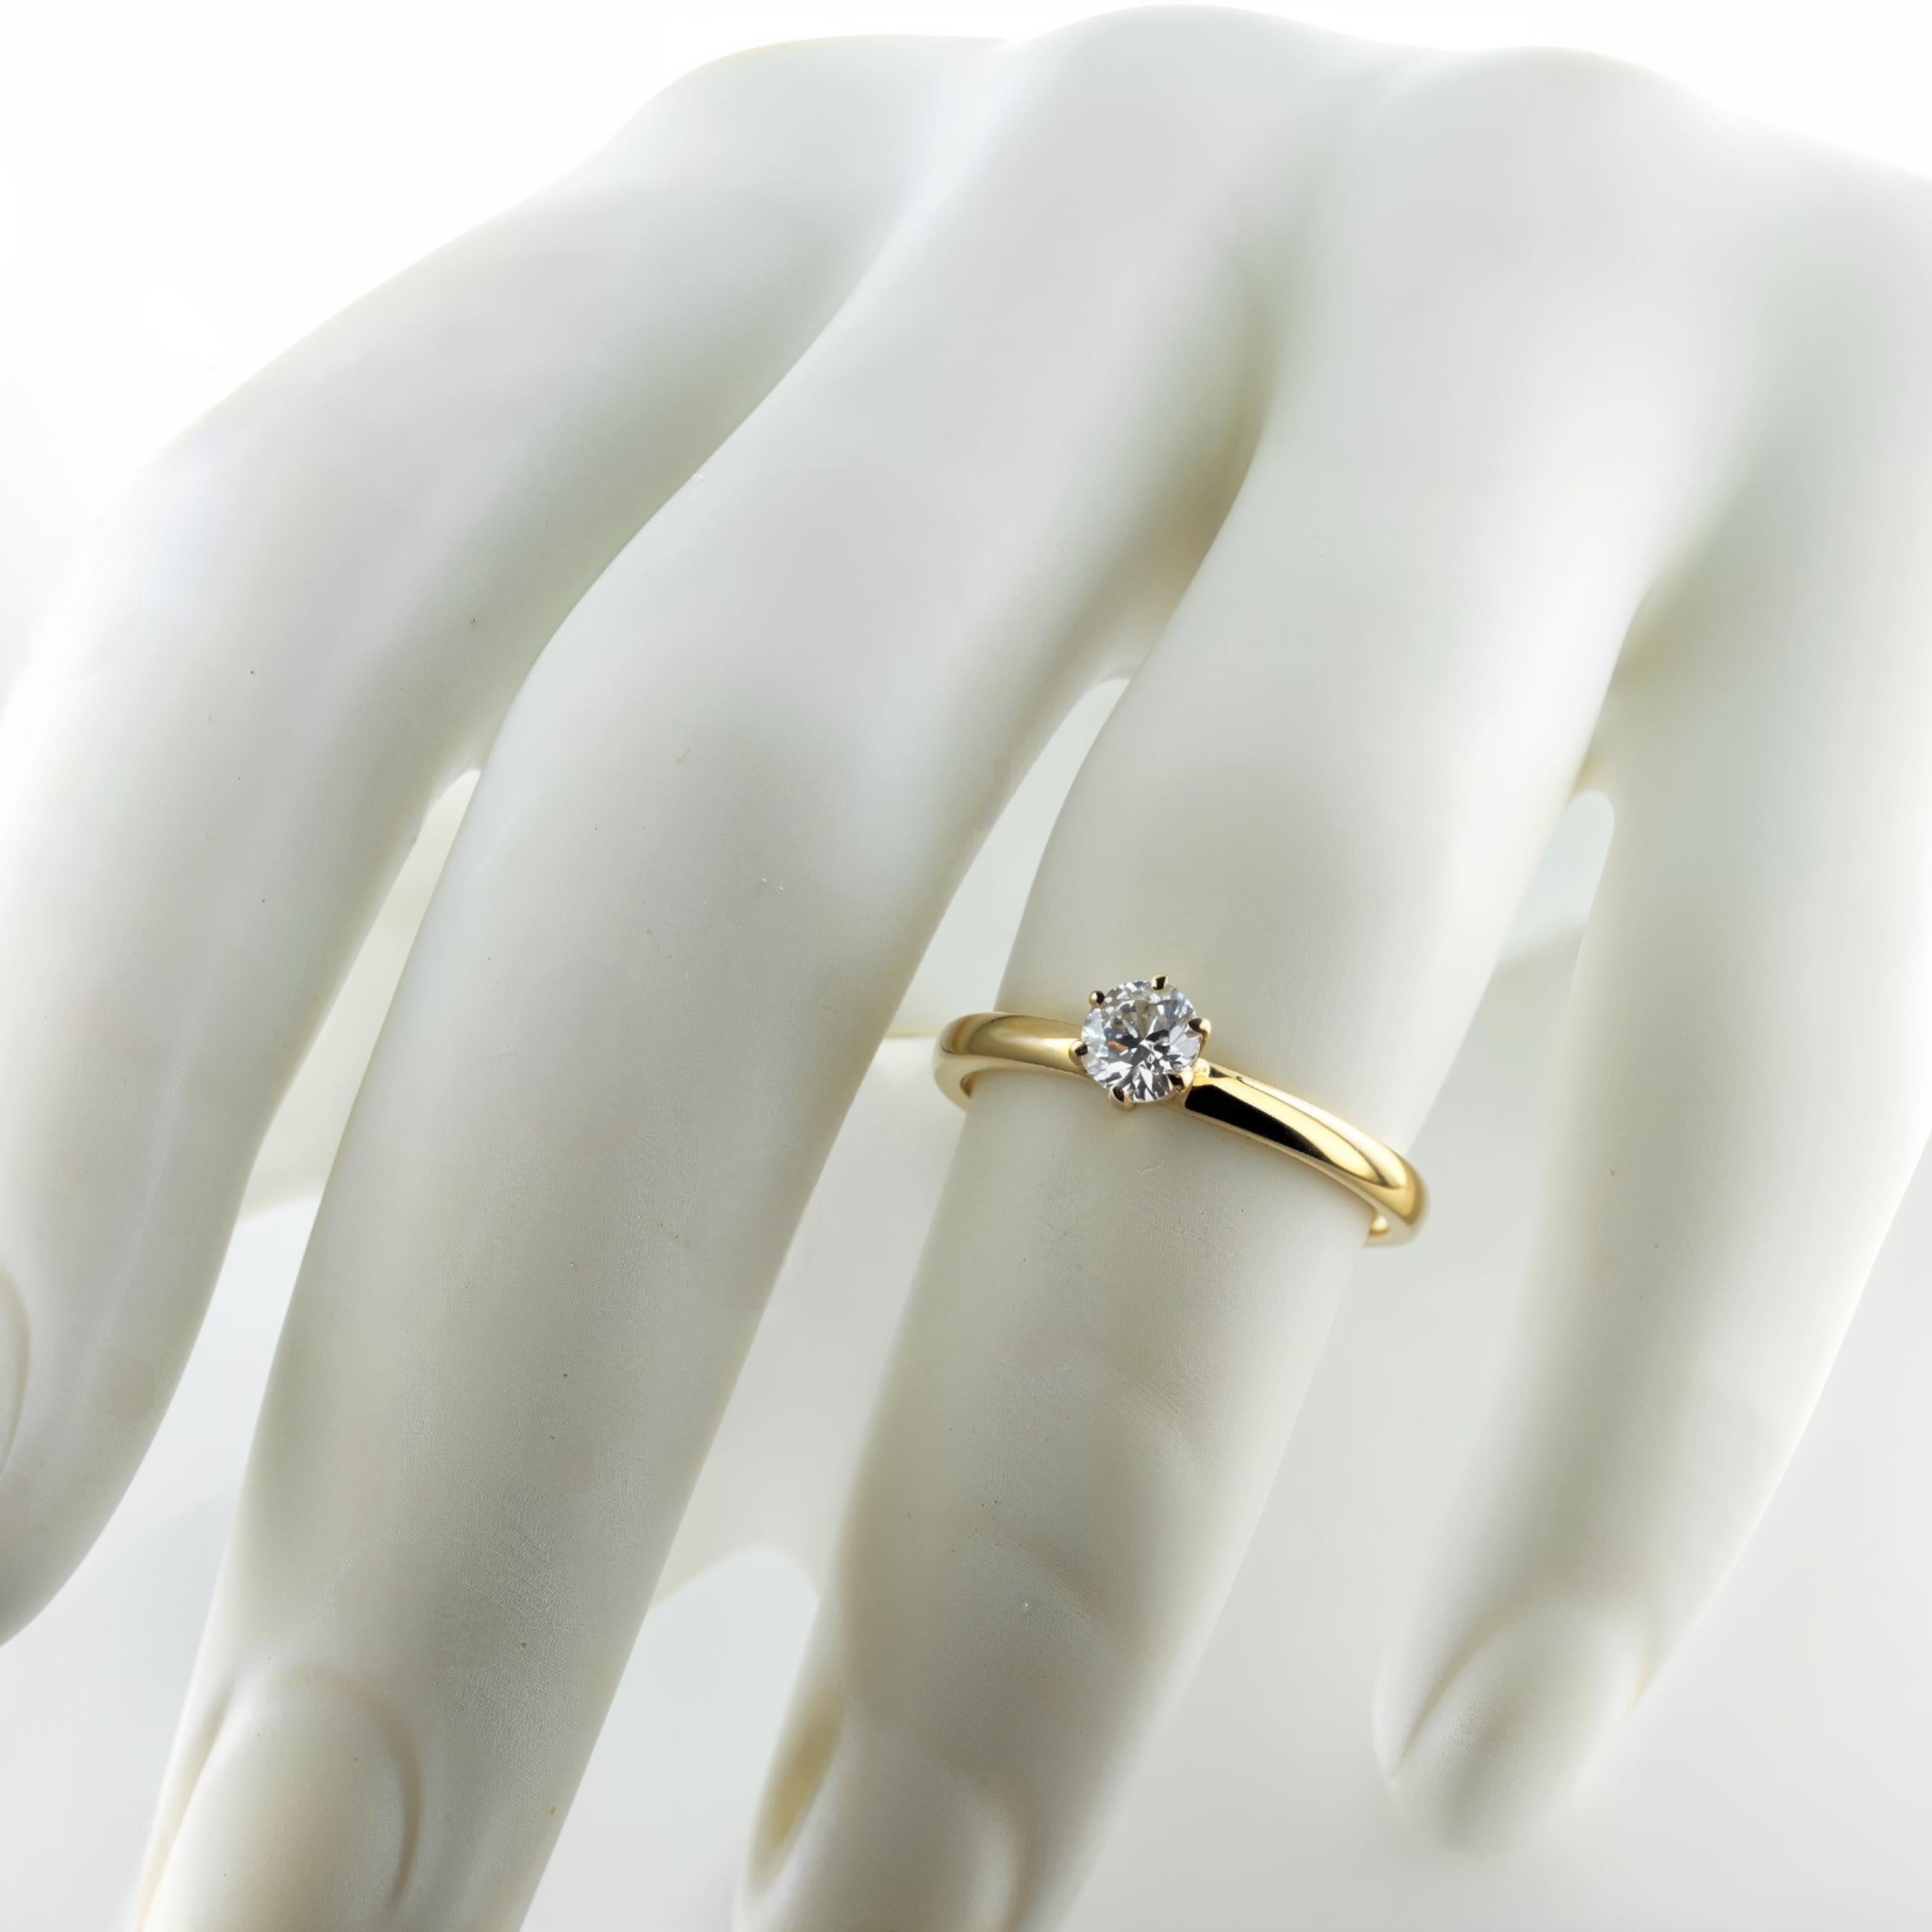 For Sale:  Stunning Classic 0.25 Carat Diamond Solitaire Ring in 14K Gold 12